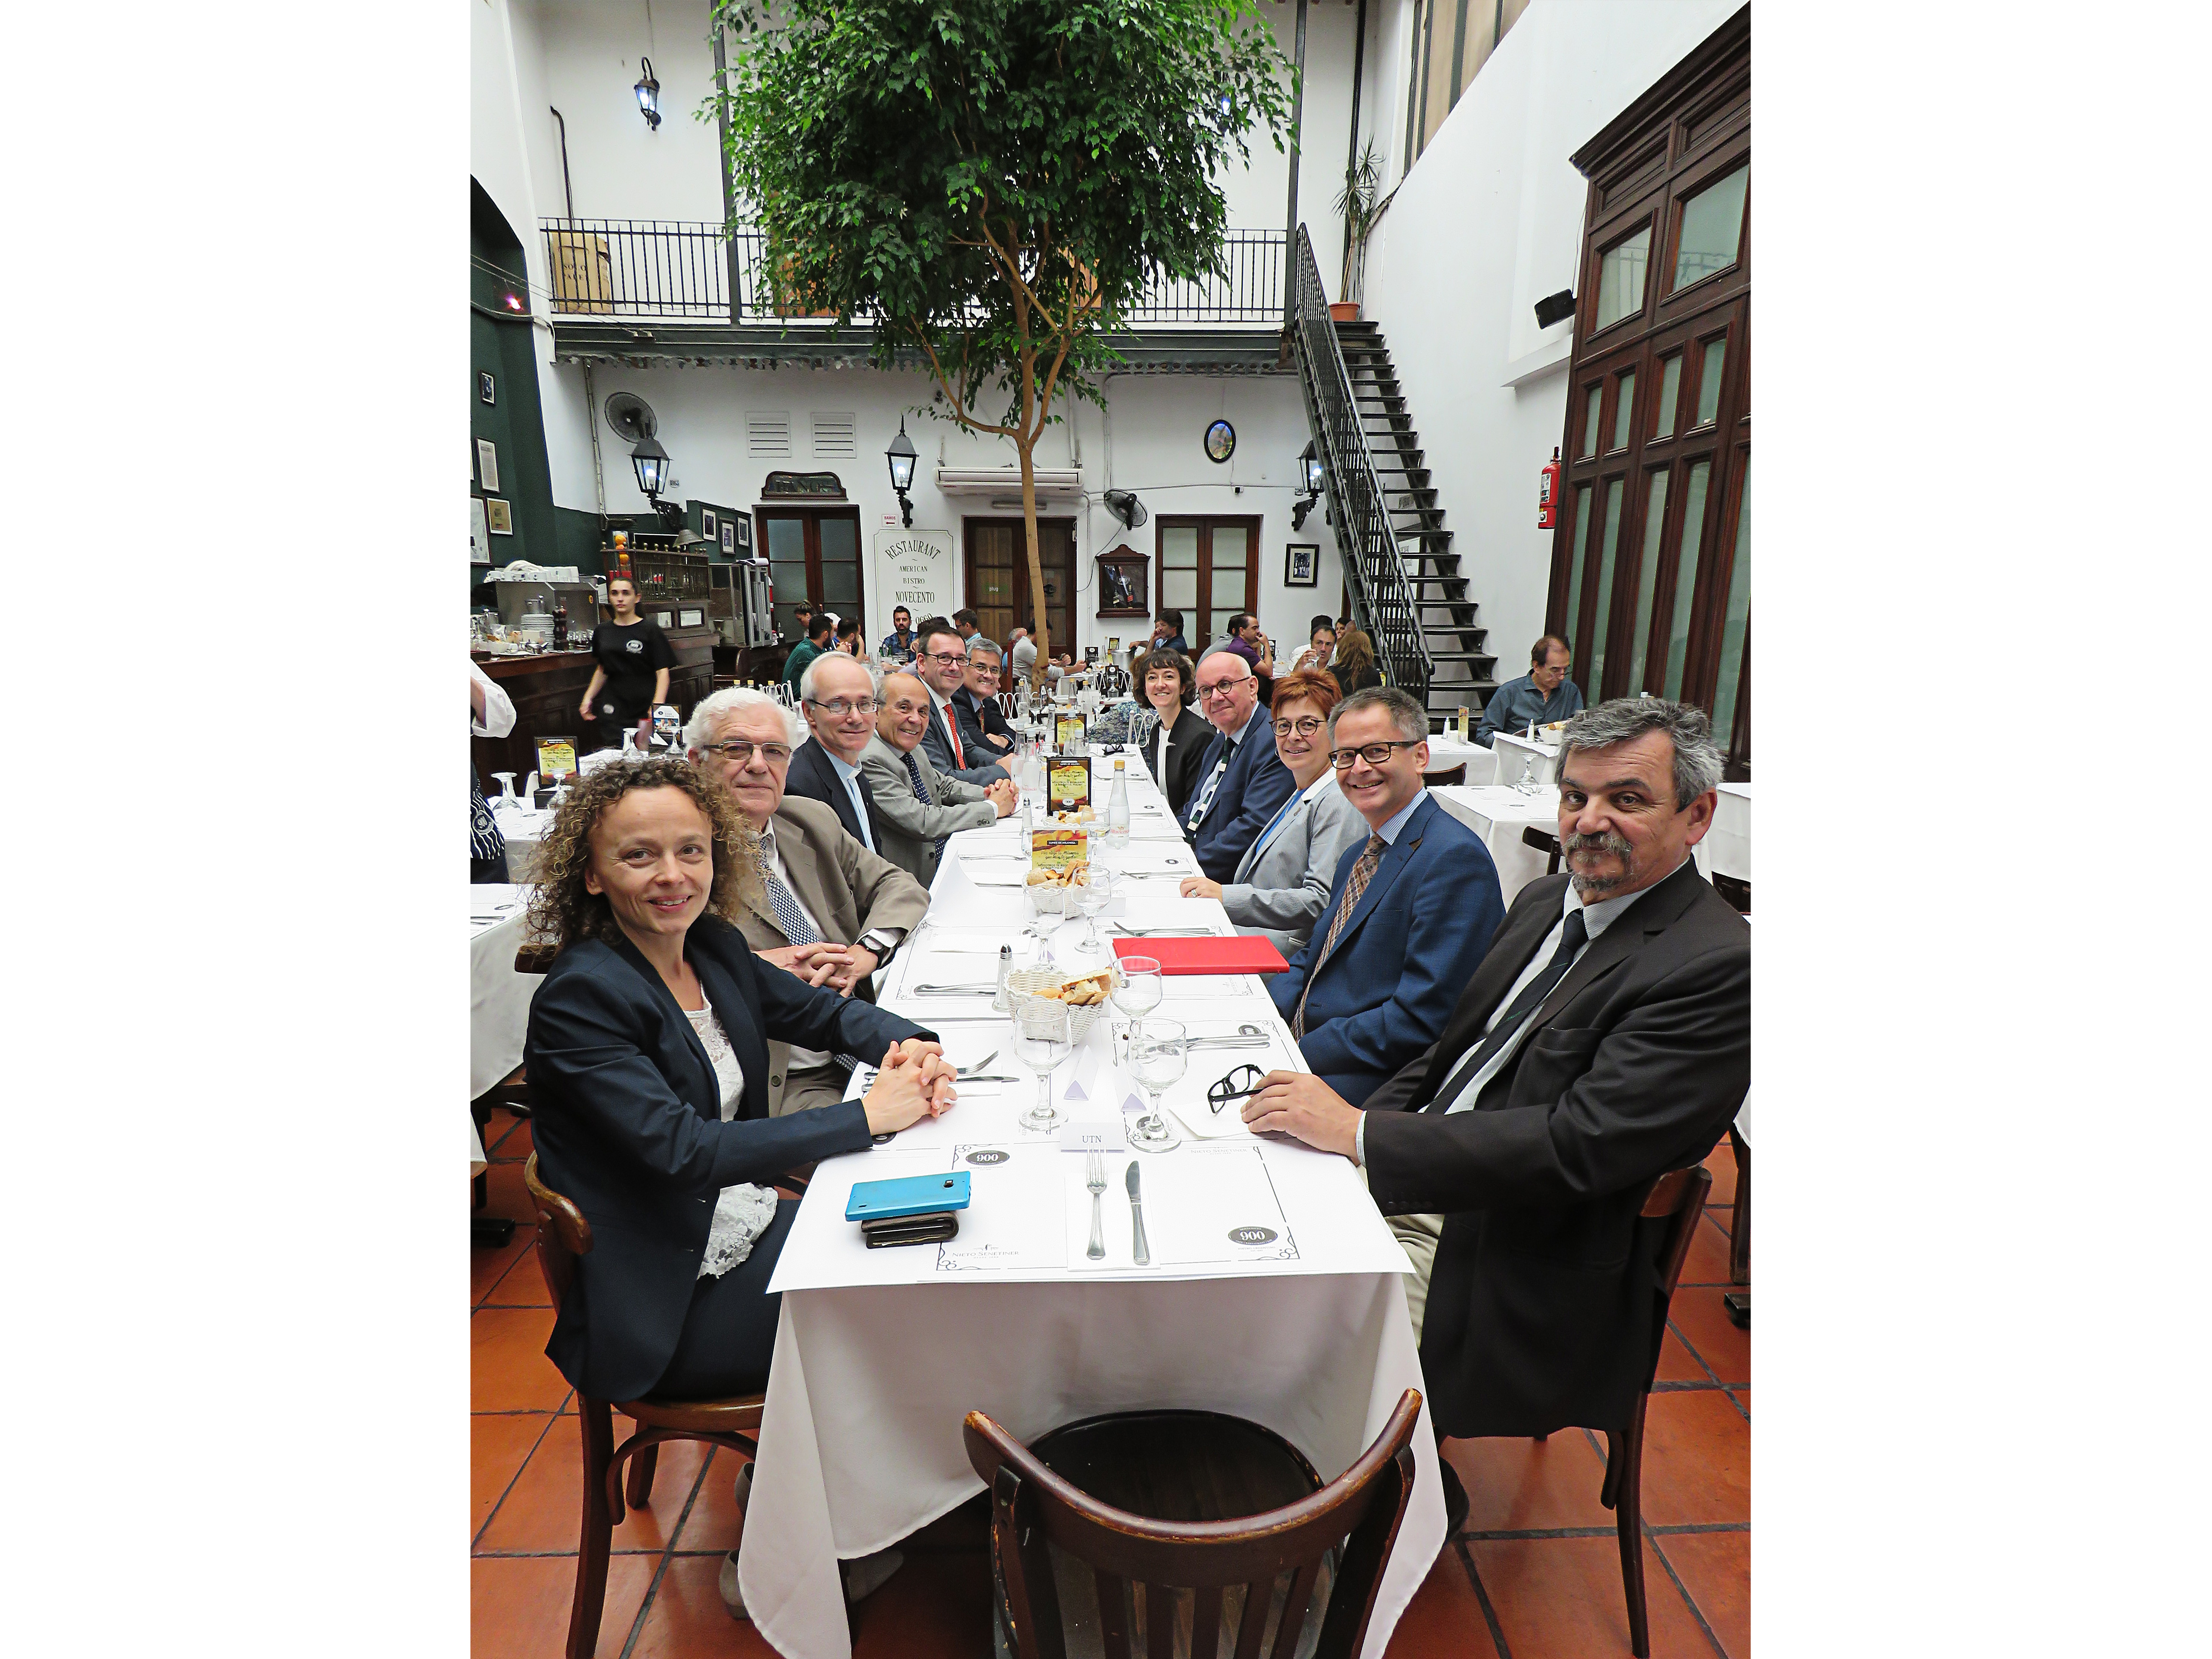 Lunch with guests from the research community (bottom to top/left to right): Dr Kathrin Winkler (DFG Office Latin America), Dr Pedro Depetris (CICTERRA), Dr Alfonso Gómez (rector of the Catholic University of Córdoba), Dr Juan Alfredo Tirao (presiden